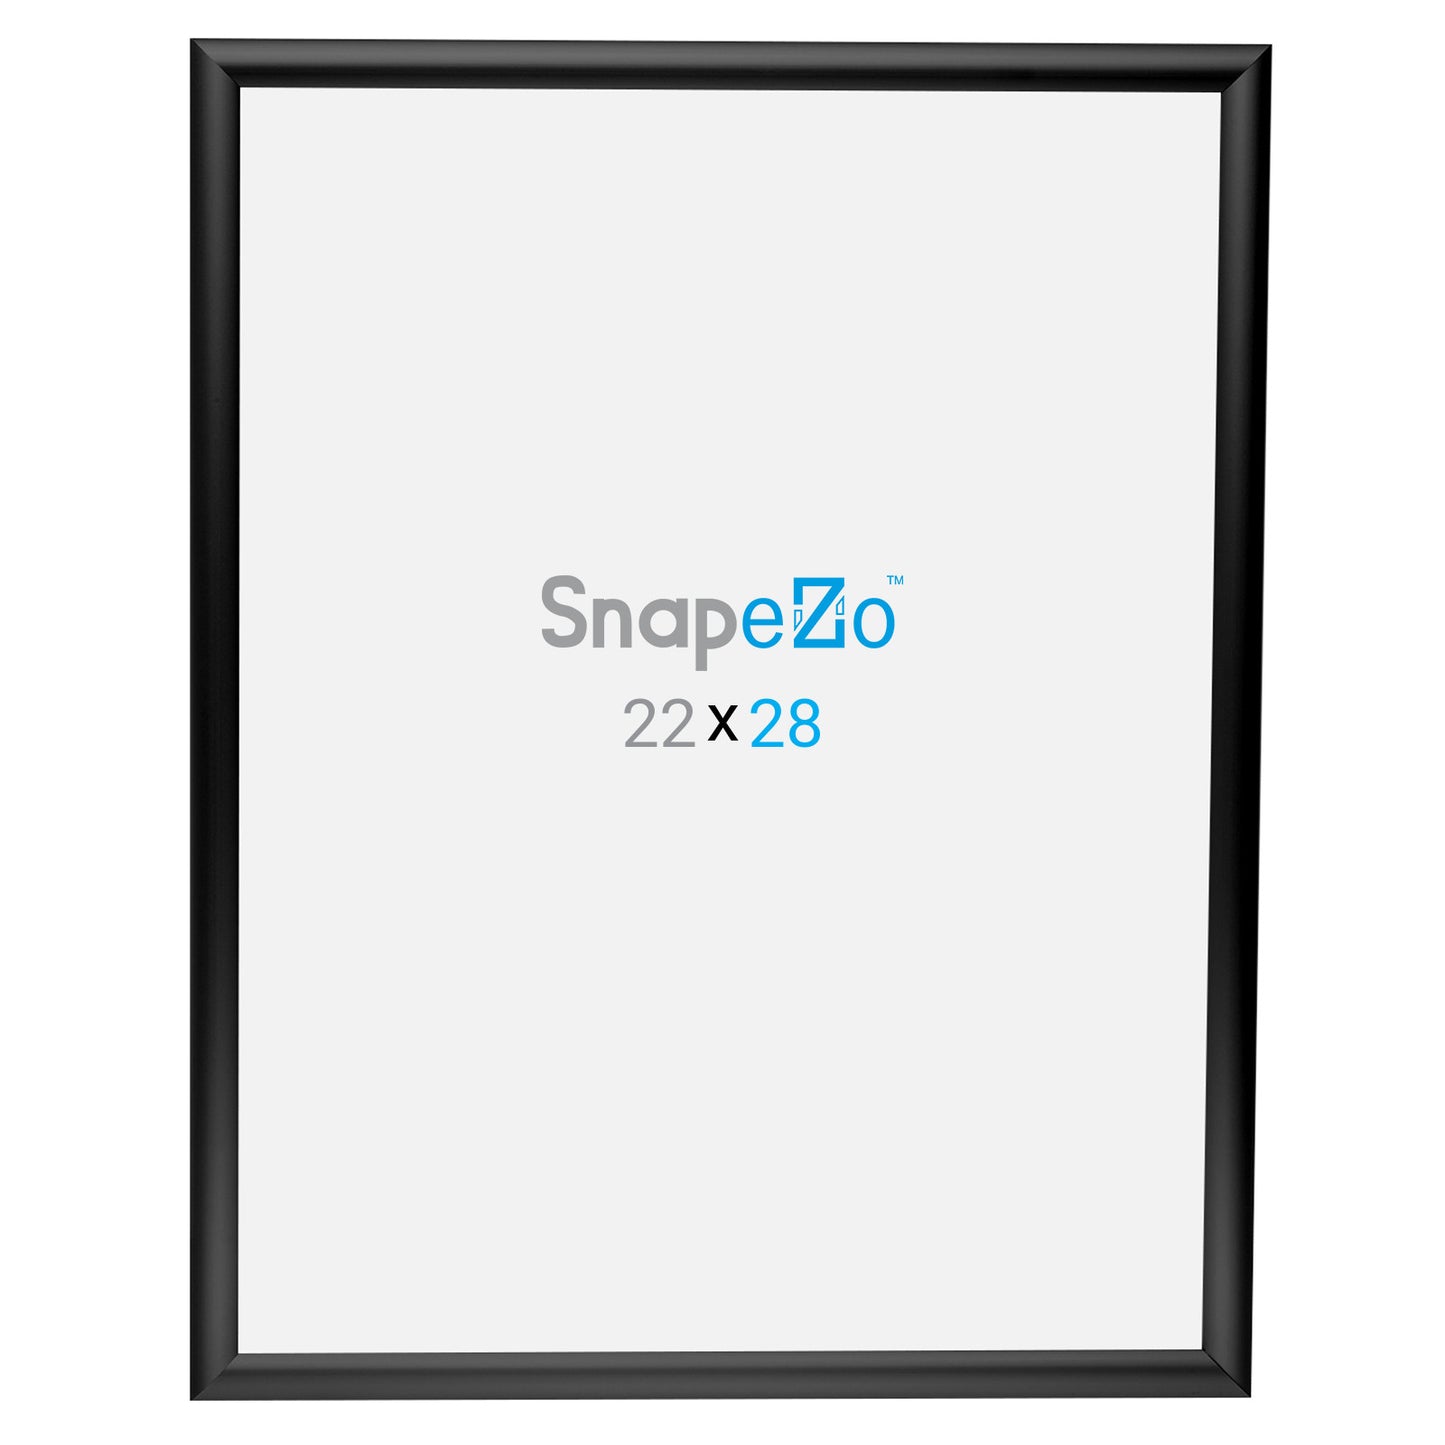 10 Case Pack of Snapezo® of Black 22x28 Poster Frame - 1" Profile